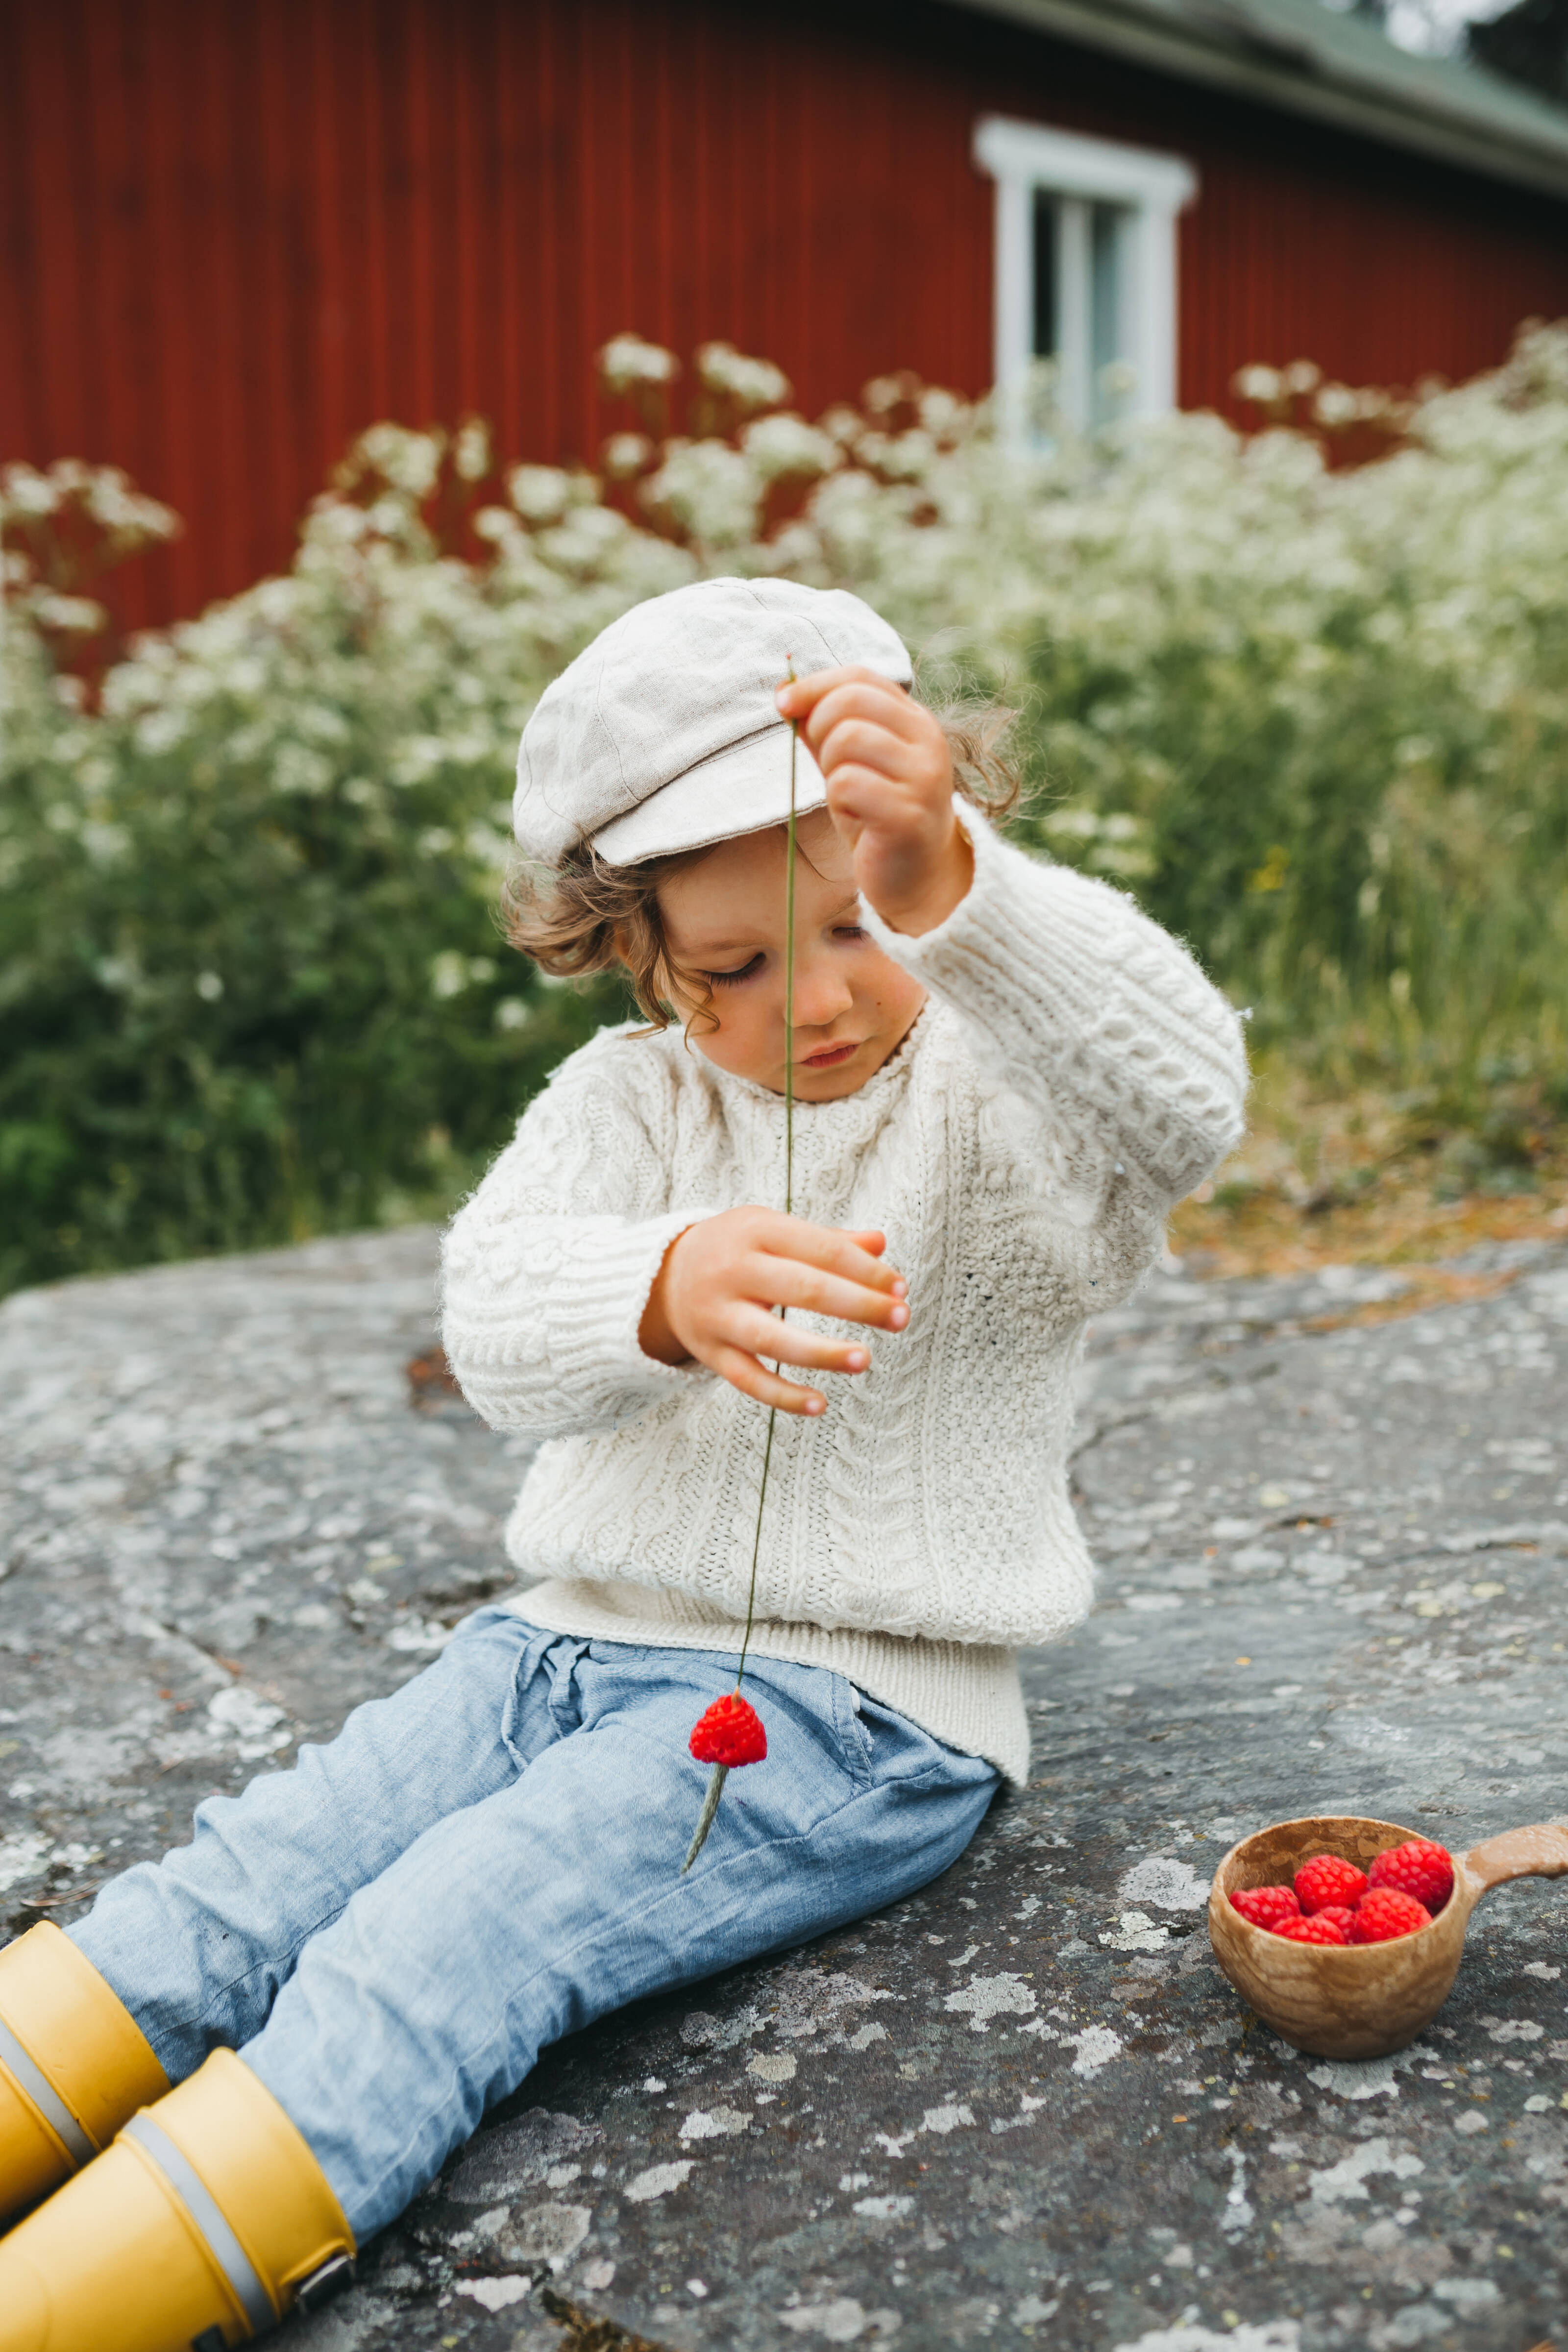 a child focussing on piercing berries through a haystack